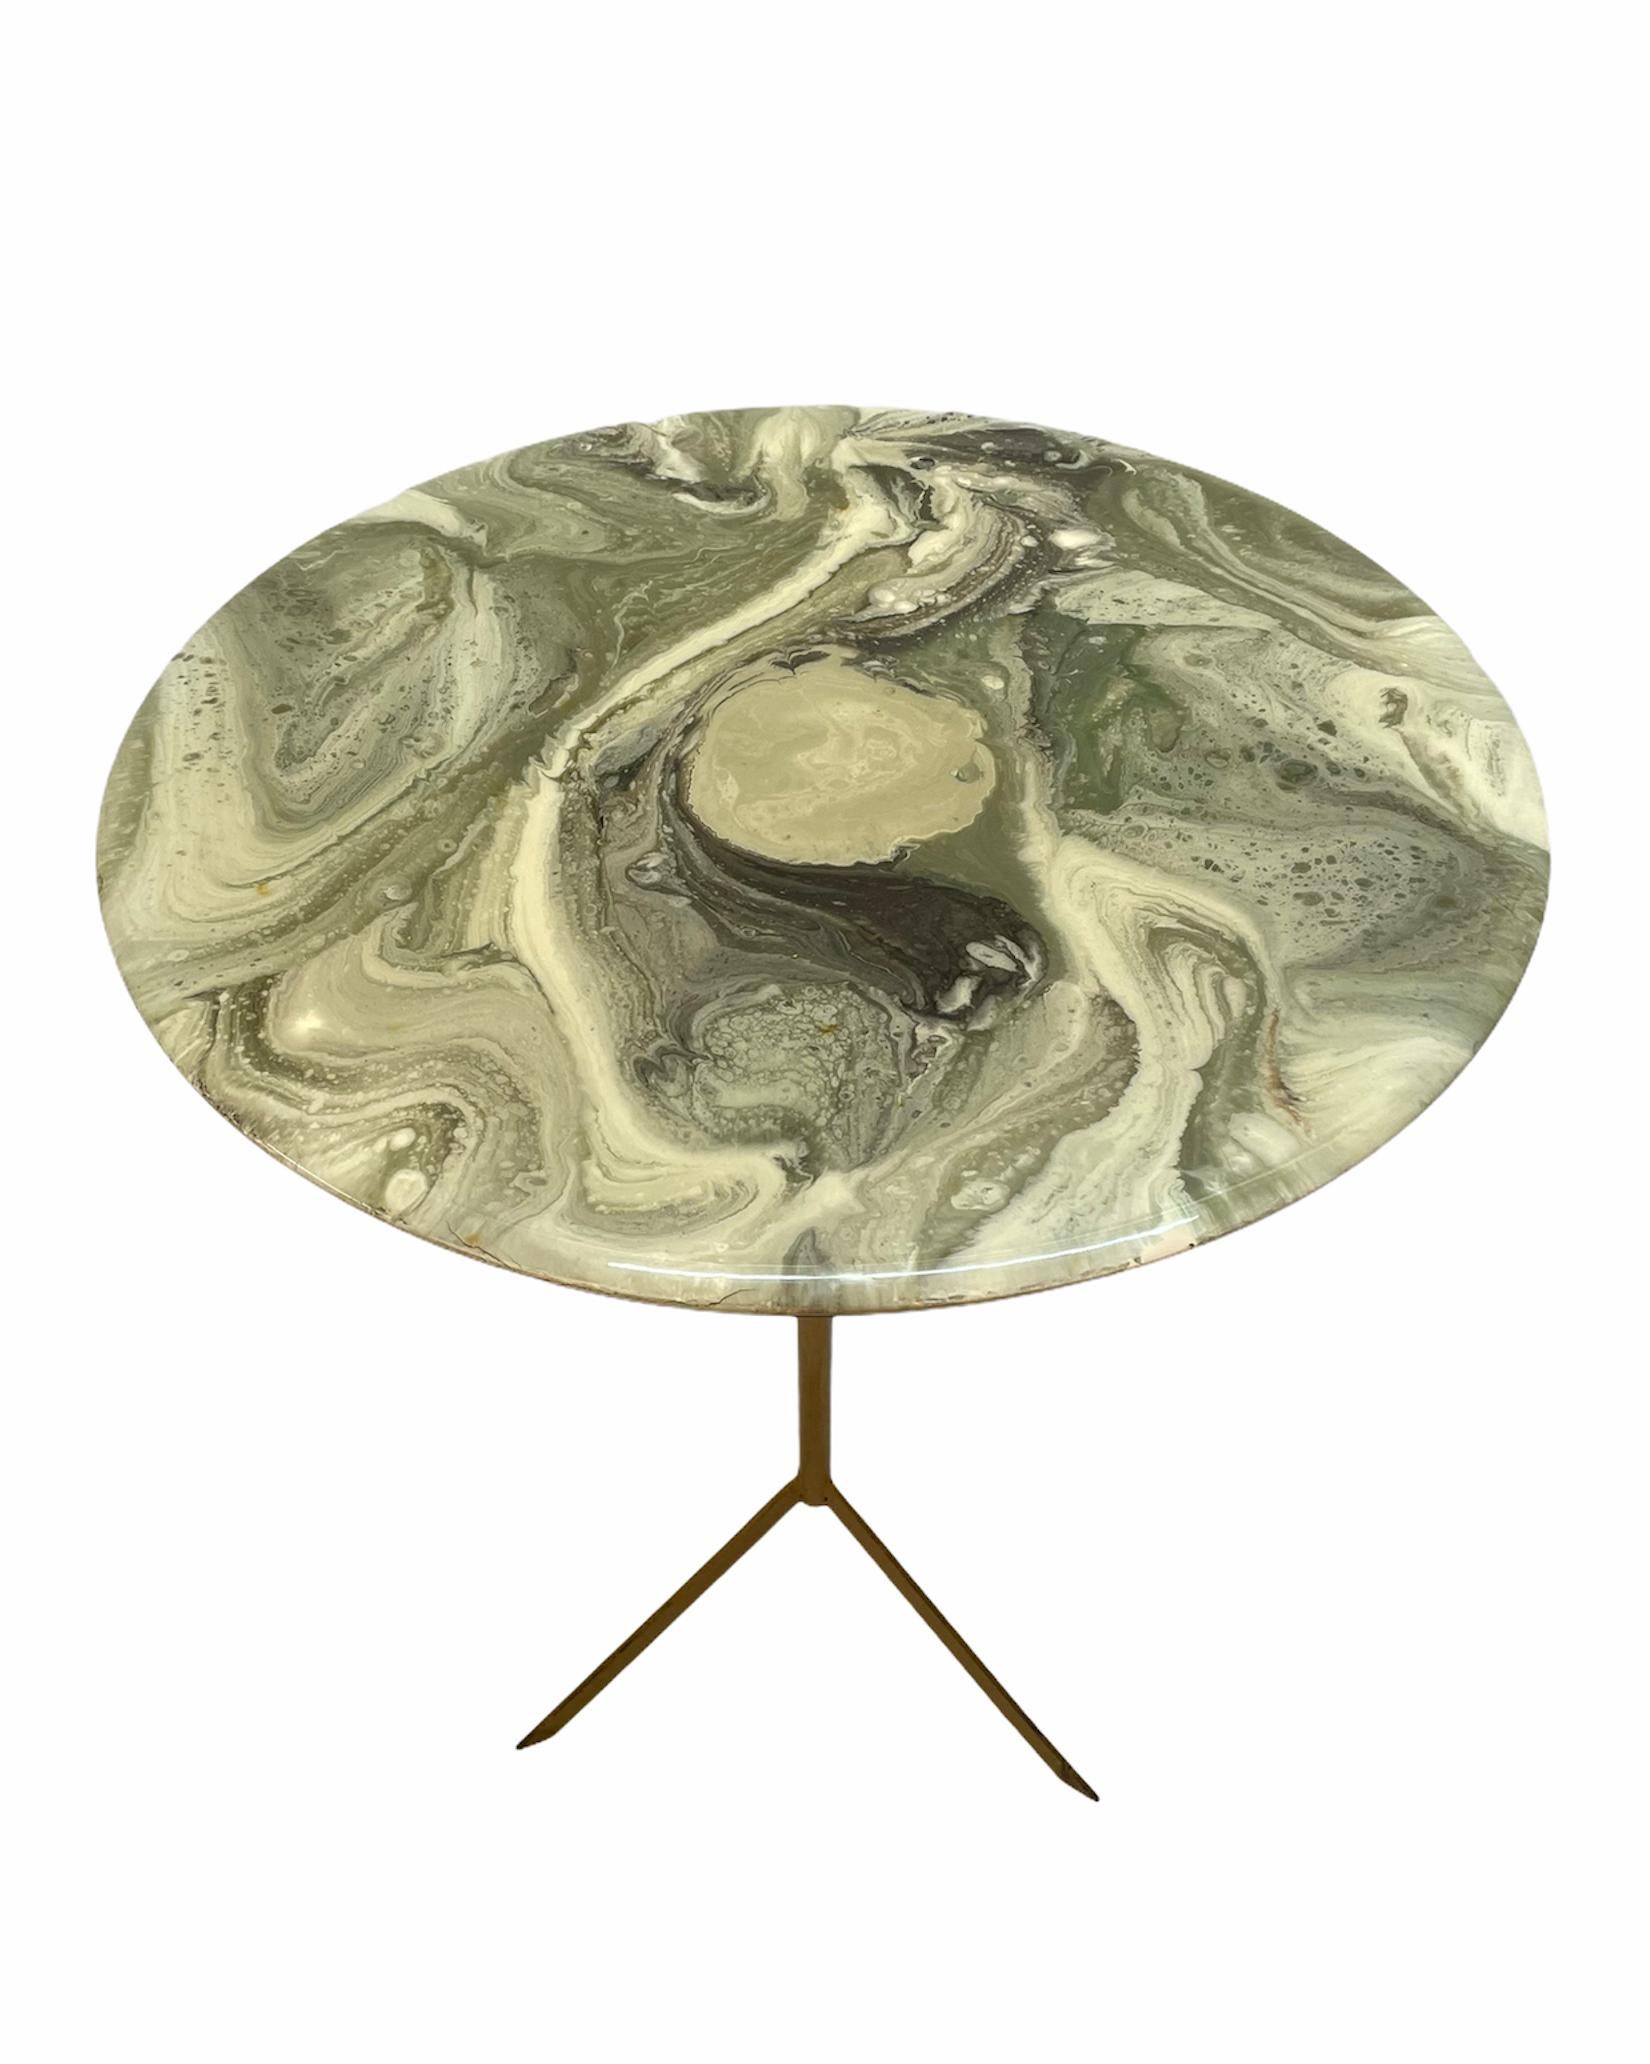 Midcentury Round Italian Gueridon Table with Marble Resin Top and Metal, 1950s For Sale 6